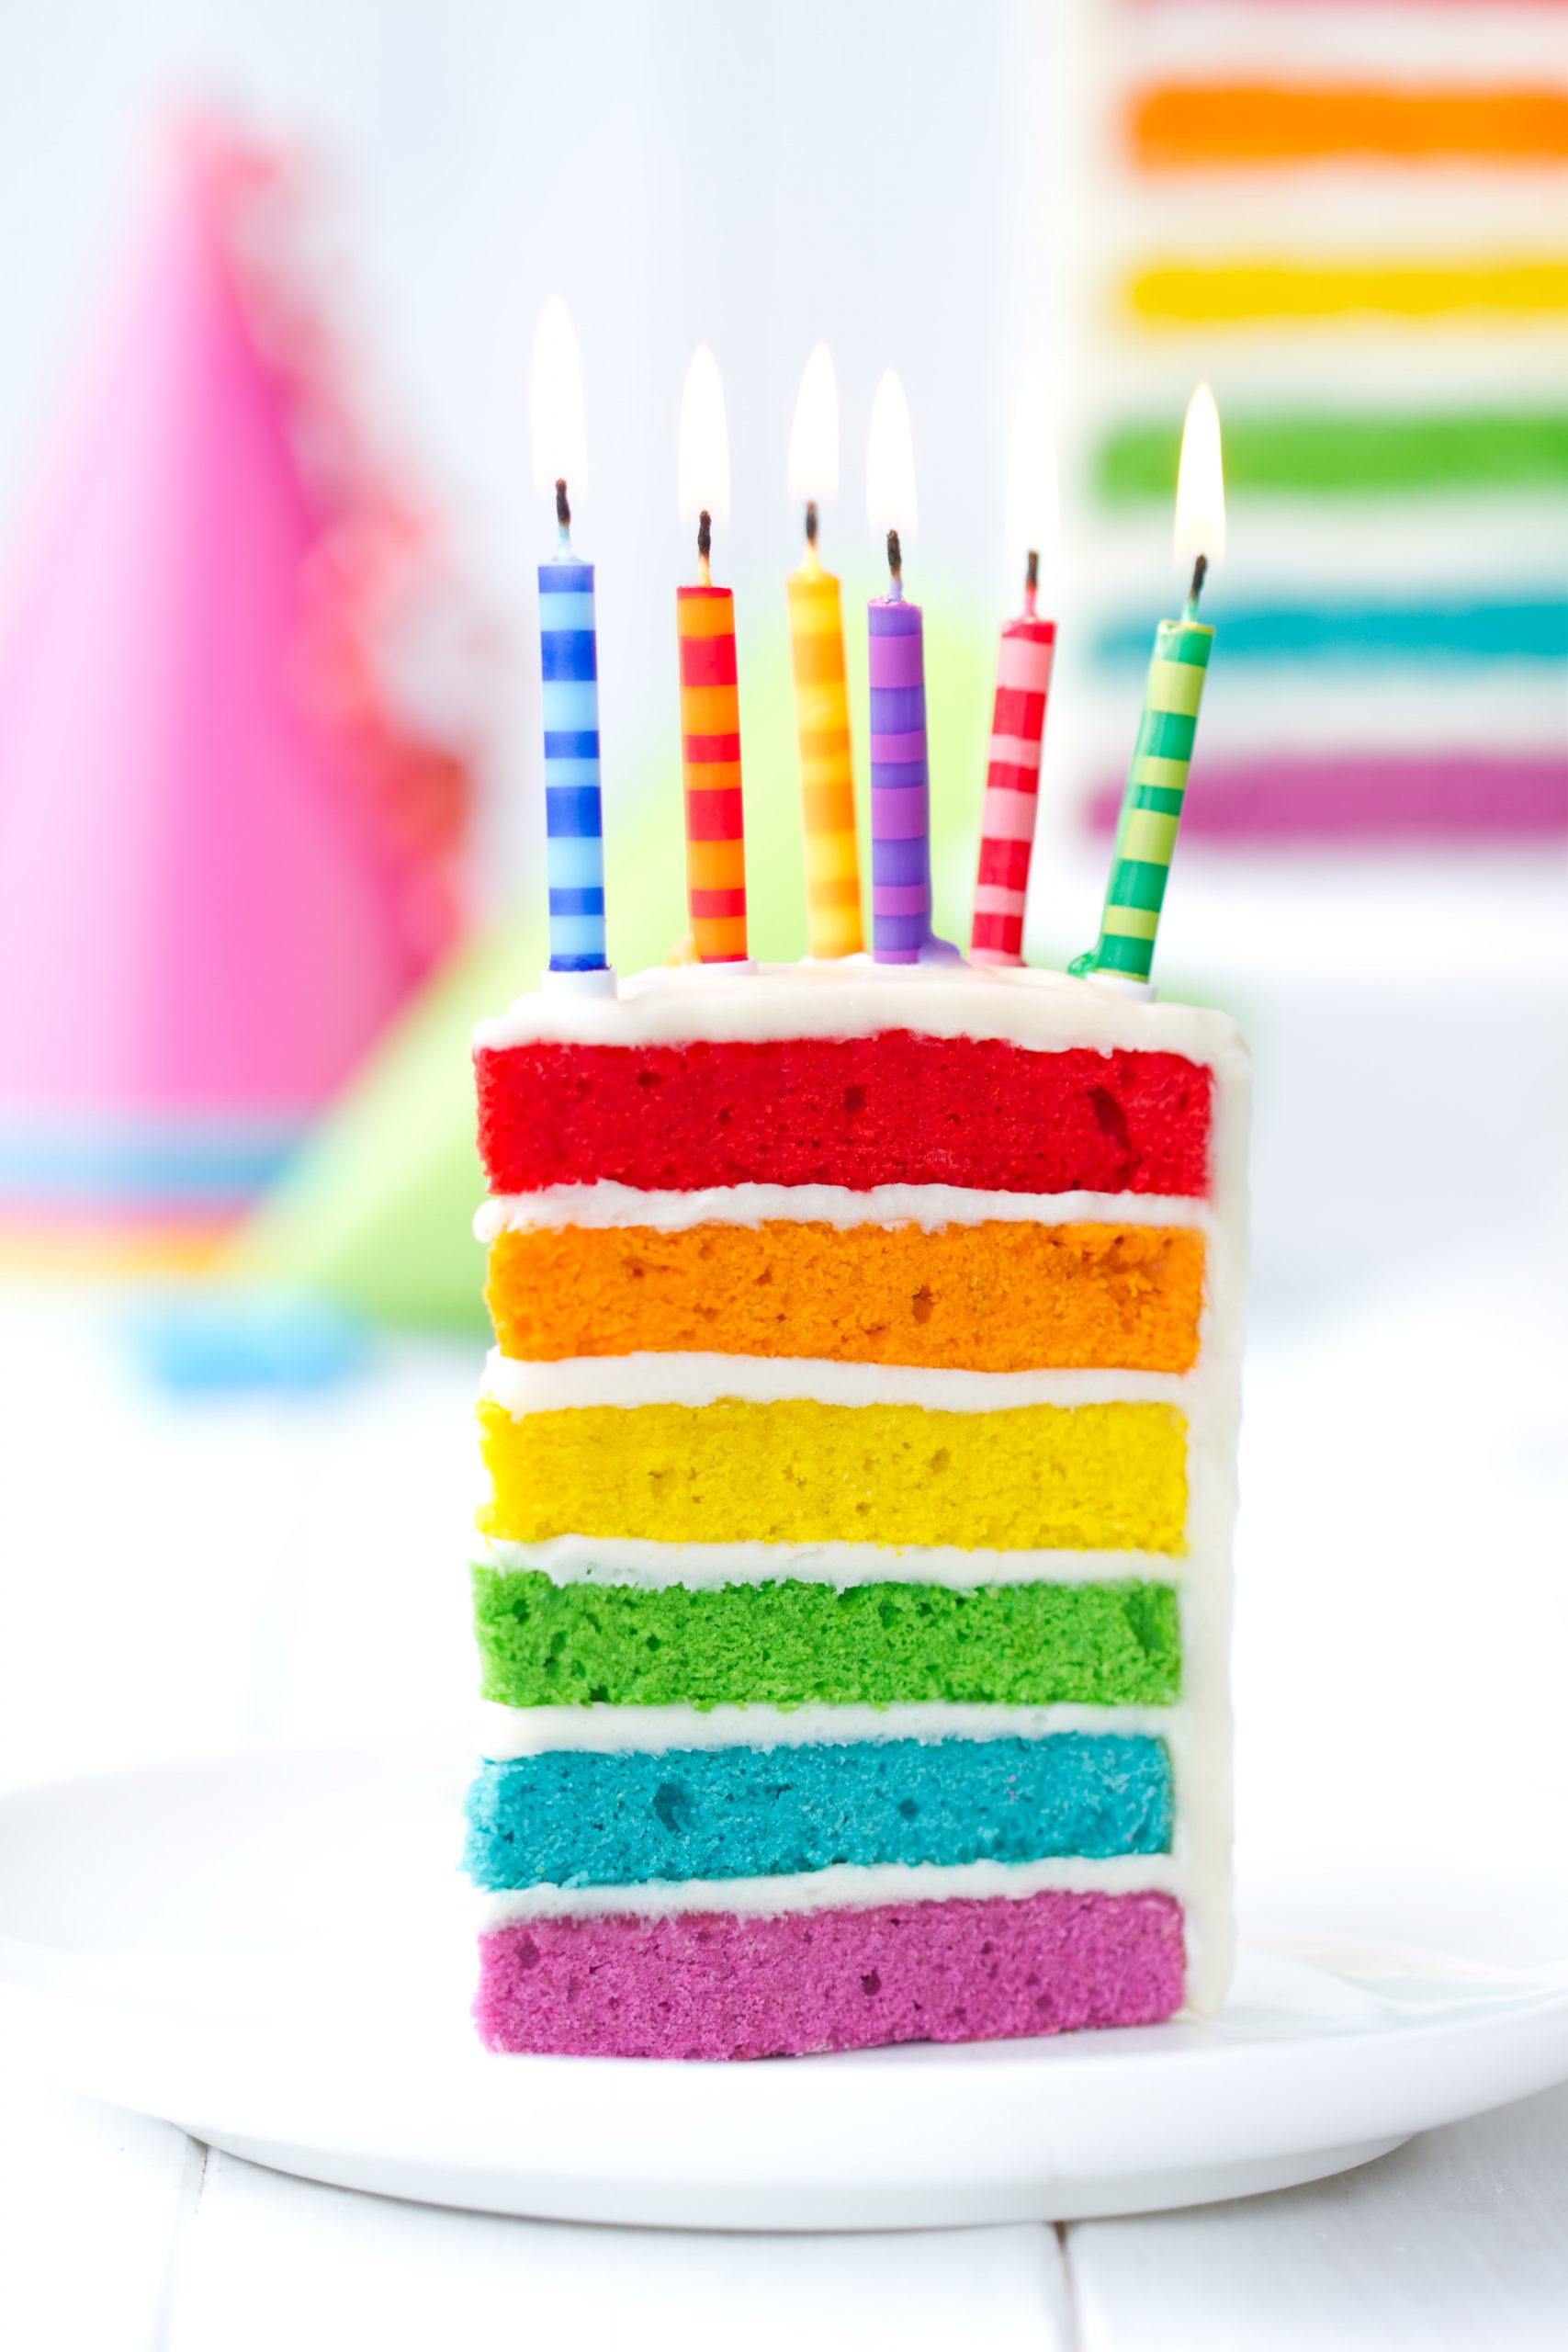 50 Layers of Happiness Birthday Cakes that Delight : Rainbow Cake